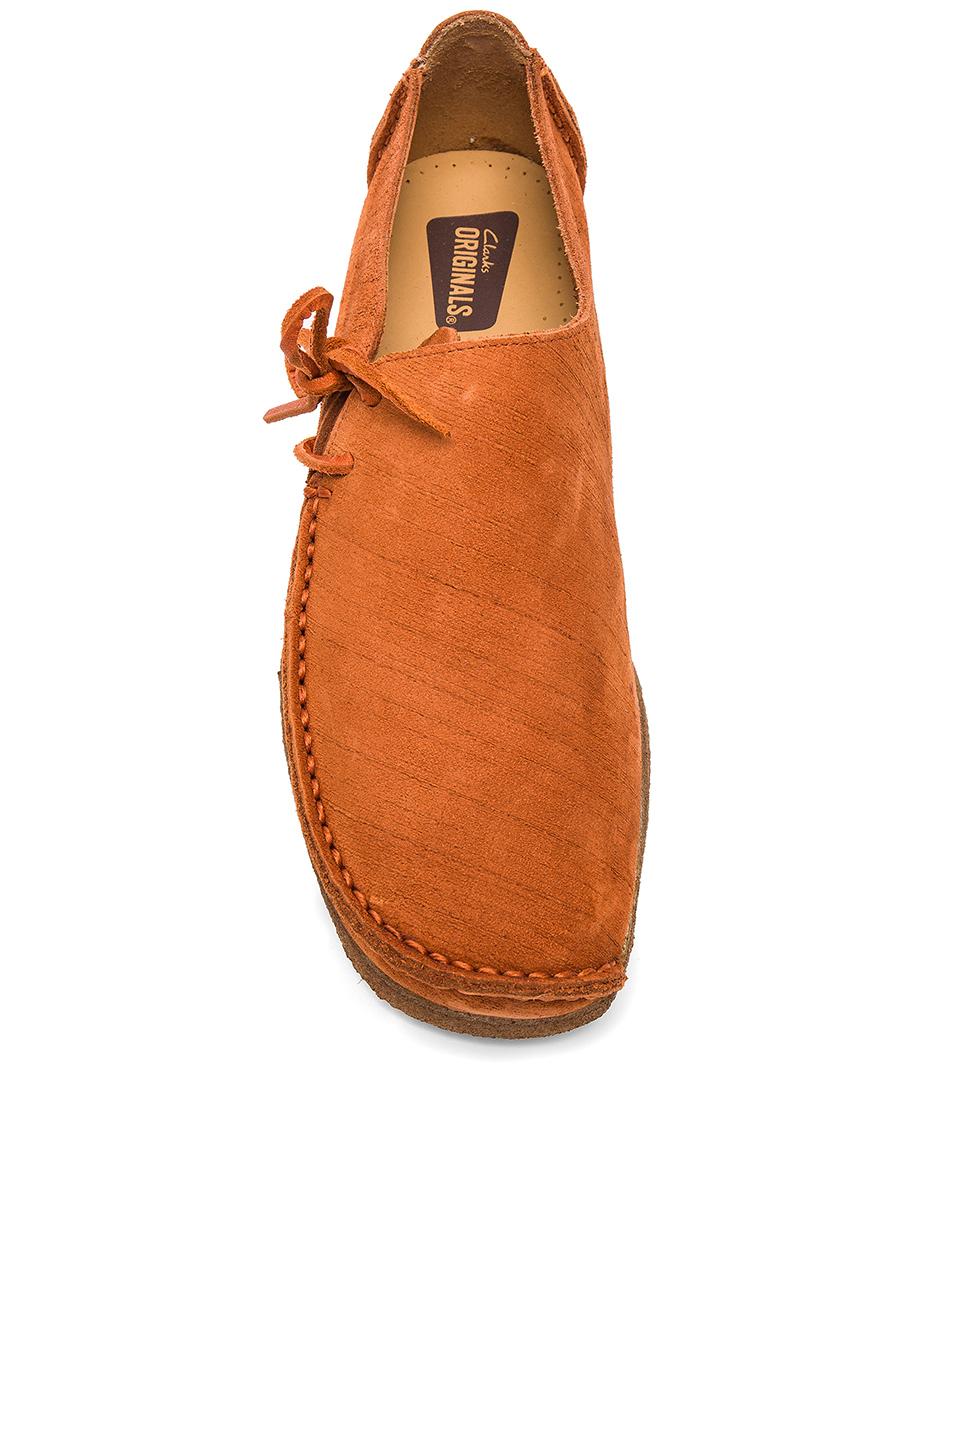 clarks lugger mens shoes